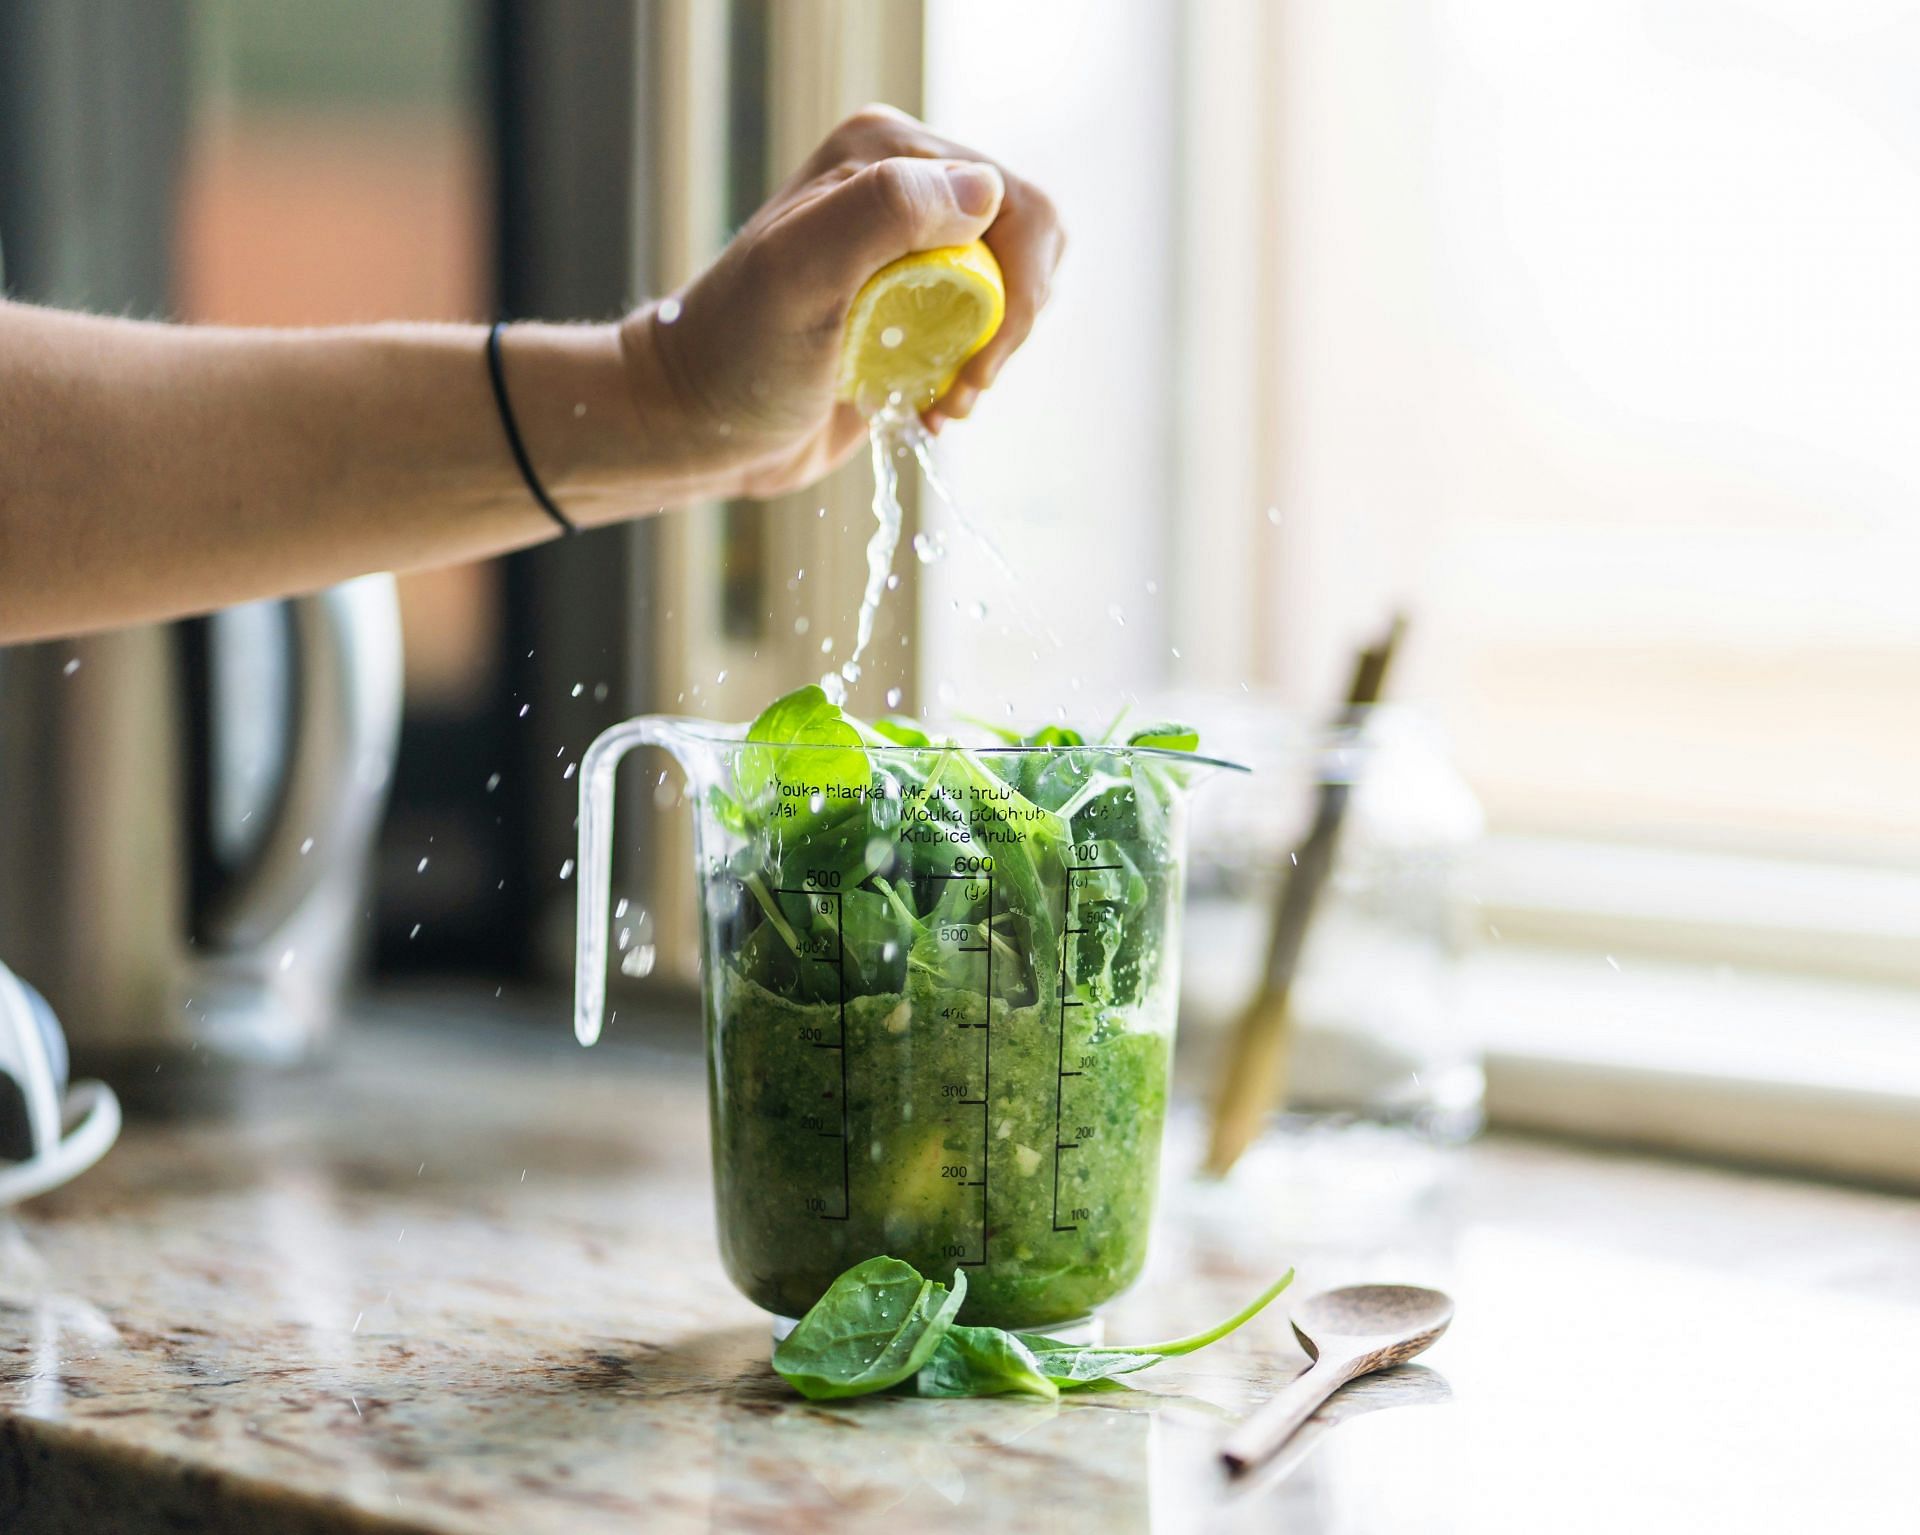 The first week is for Detox(Image by Jan Sedivy/Unsplash)